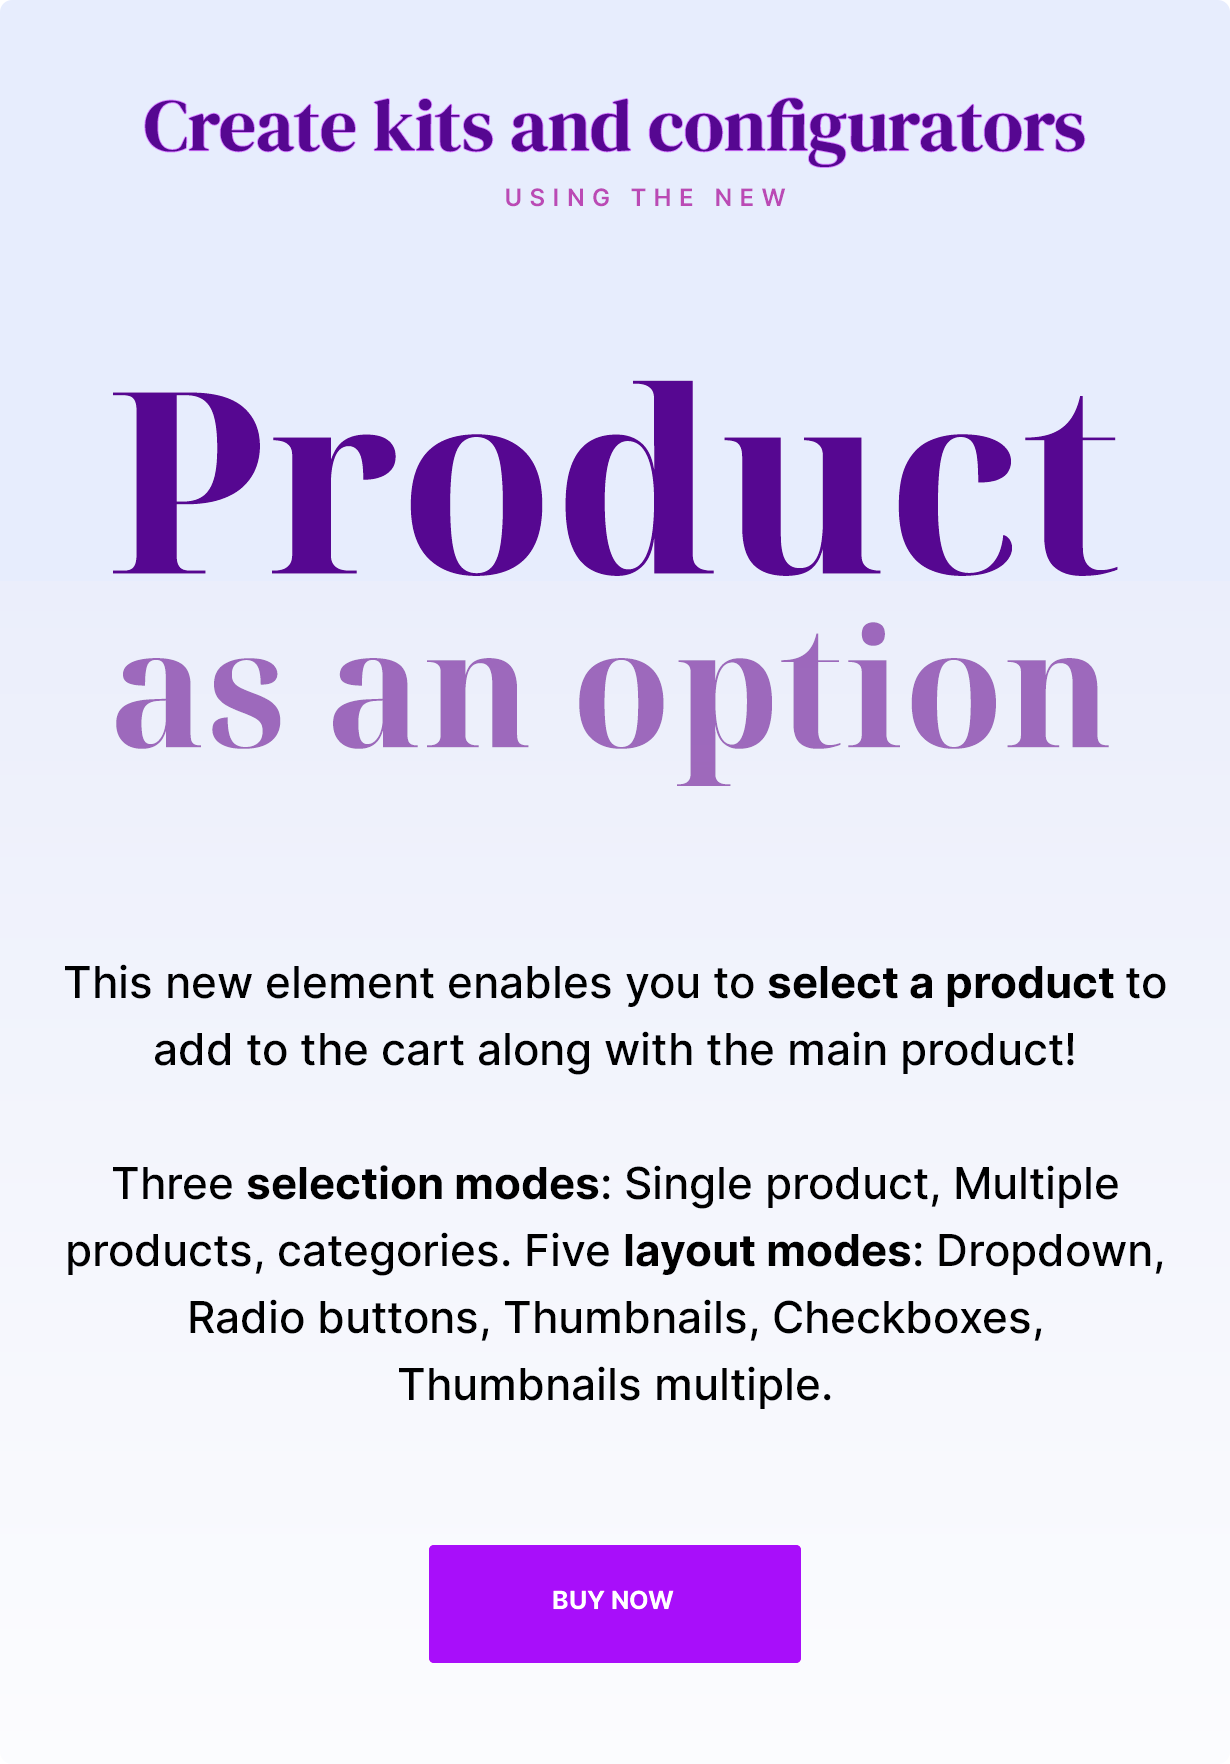 Feature Product